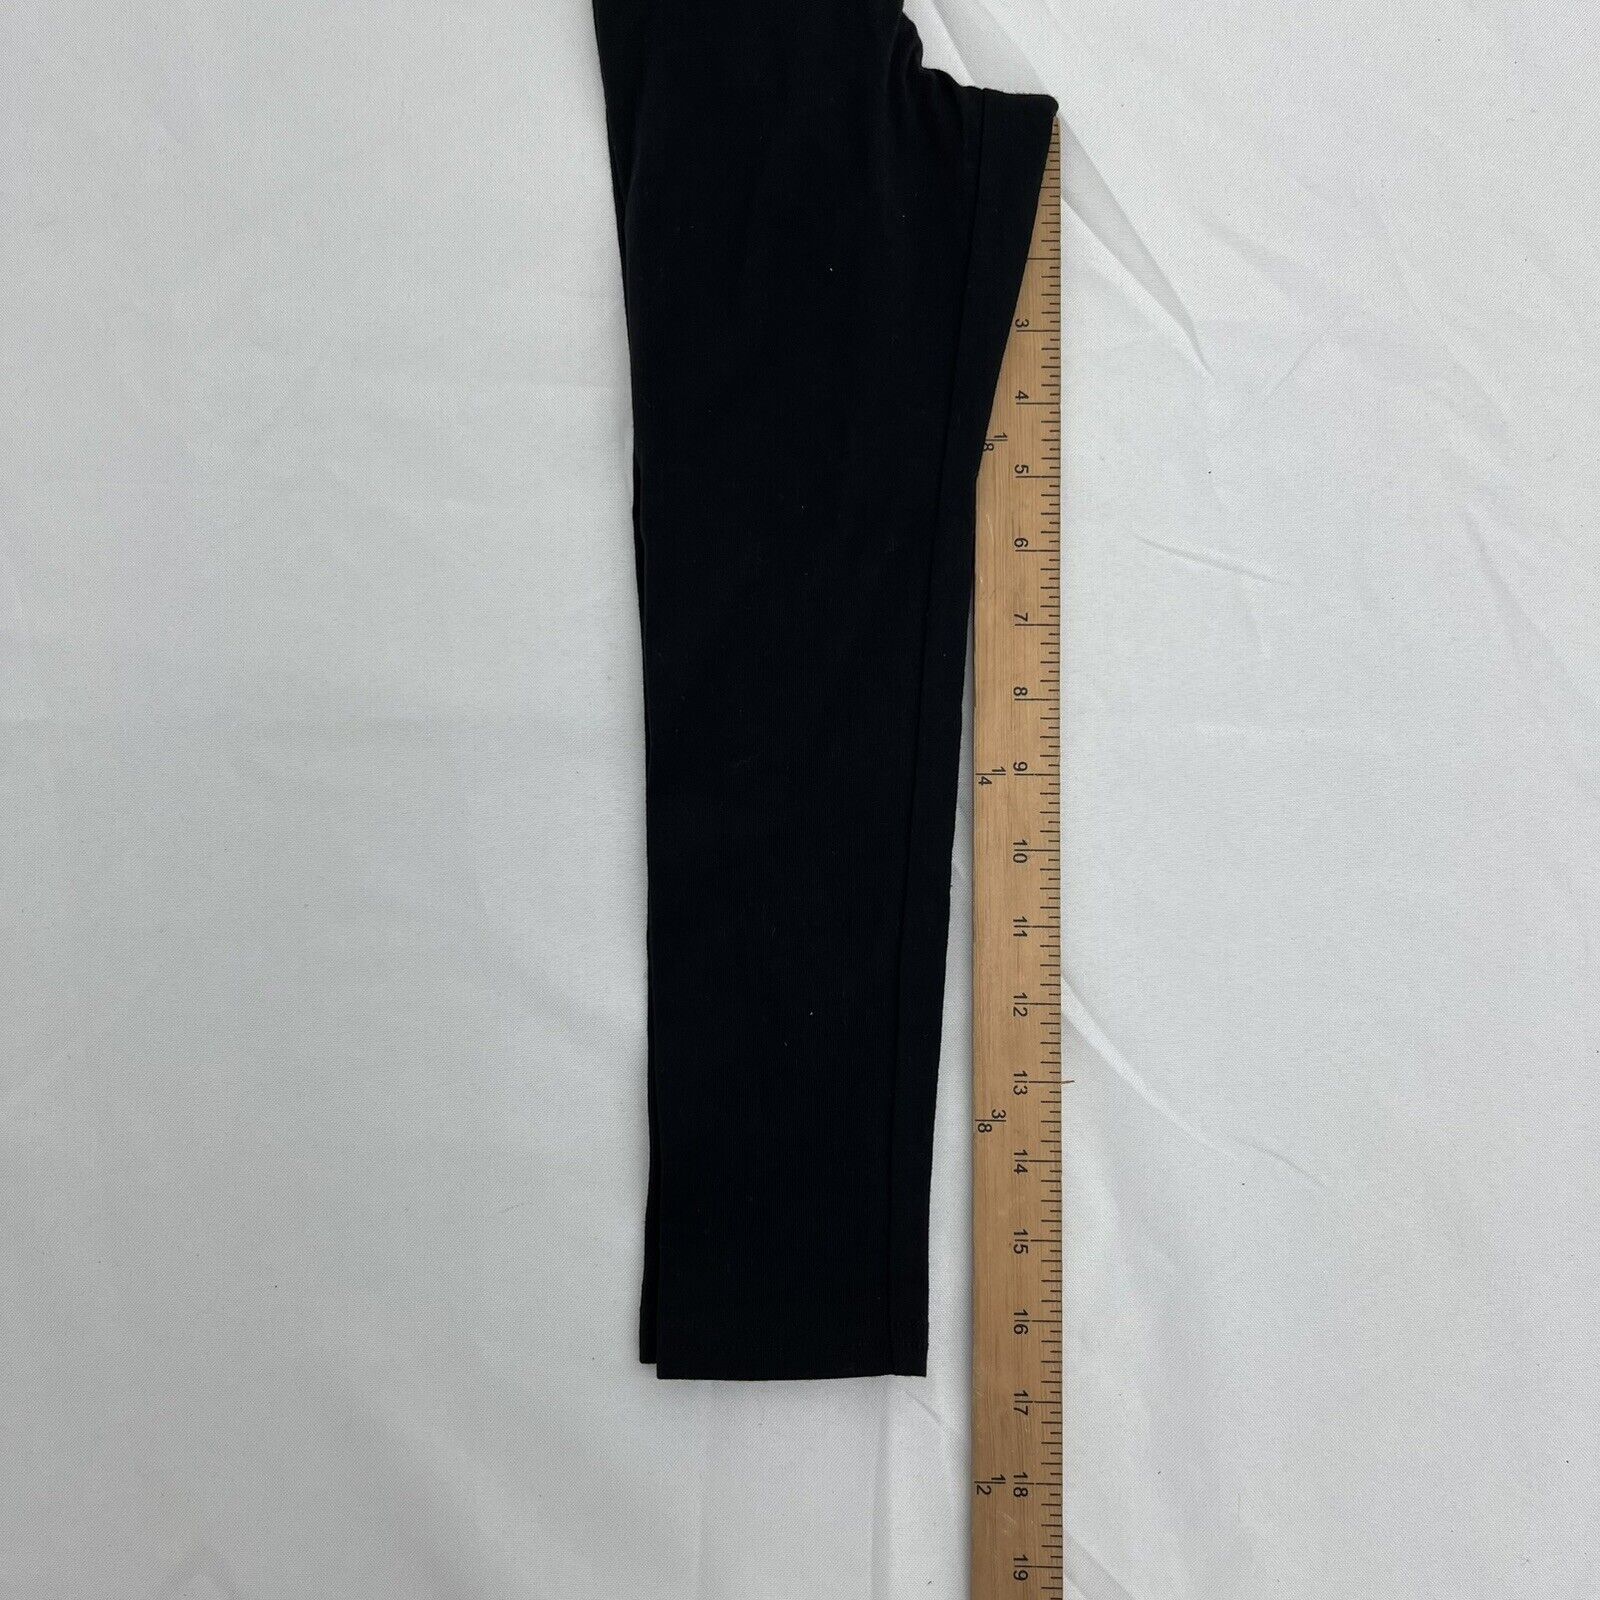 Old Navy Black Ankle Leggings Girls Size XS NEW - beyond exchange